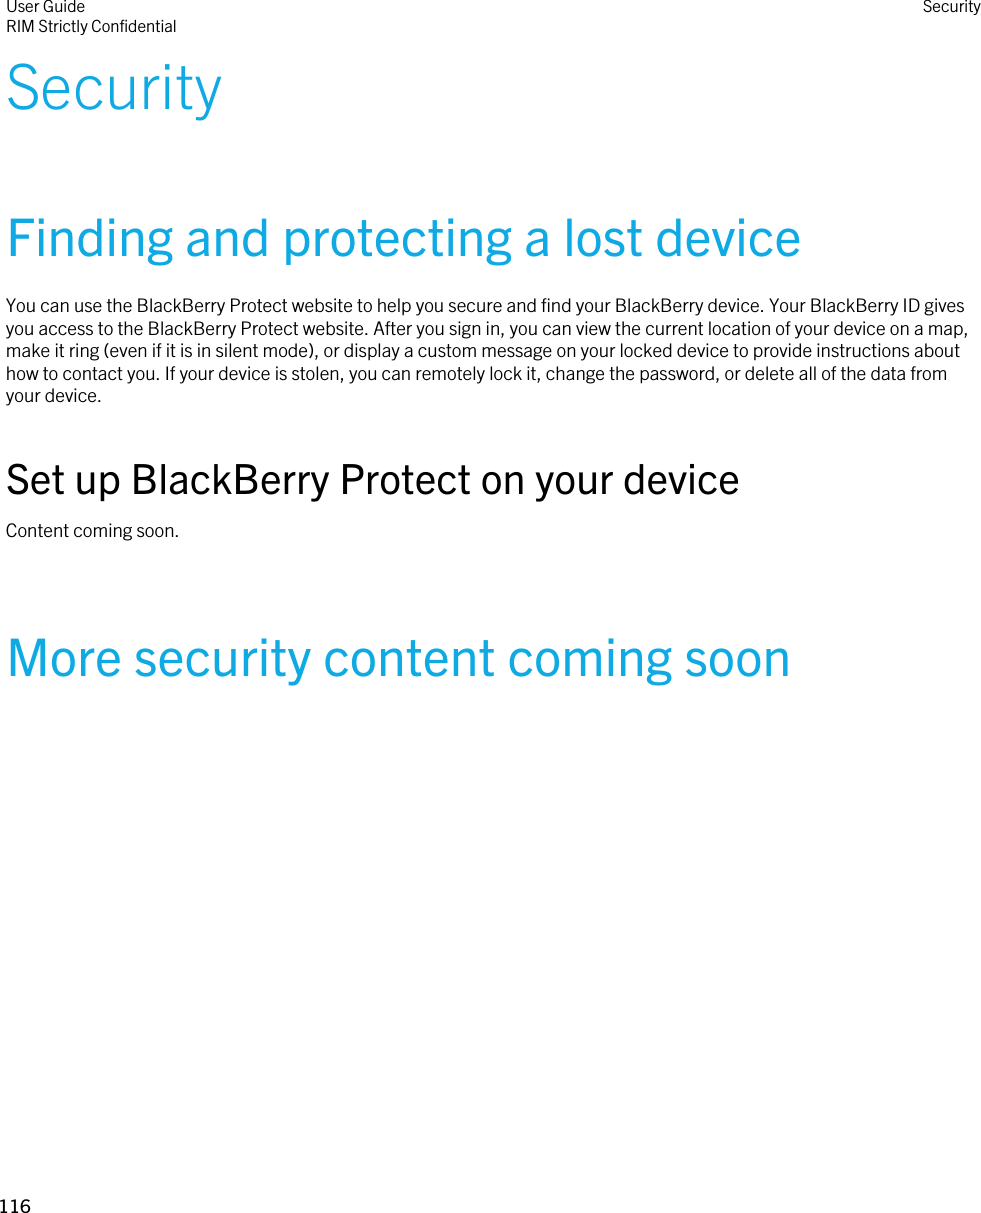 SecurityFinding and protecting a lost deviceYou can use the BlackBerry Protect website to help you secure and find your BlackBerry device. Your BlackBerry ID gives you access to the BlackBerry Protect website. After you sign in, you can view the current location of your device on a map, make it ring (even if it is in silent mode), or display a custom message on your locked device to provide instructions about how to contact you. If your device is stolen, you can remotely lock it, change the password, or delete all of the data from your device.Set up BlackBerry Protect on your deviceContent coming soon.More security content coming soonUser GuideRIM Strictly ConfidentialSecurity116 